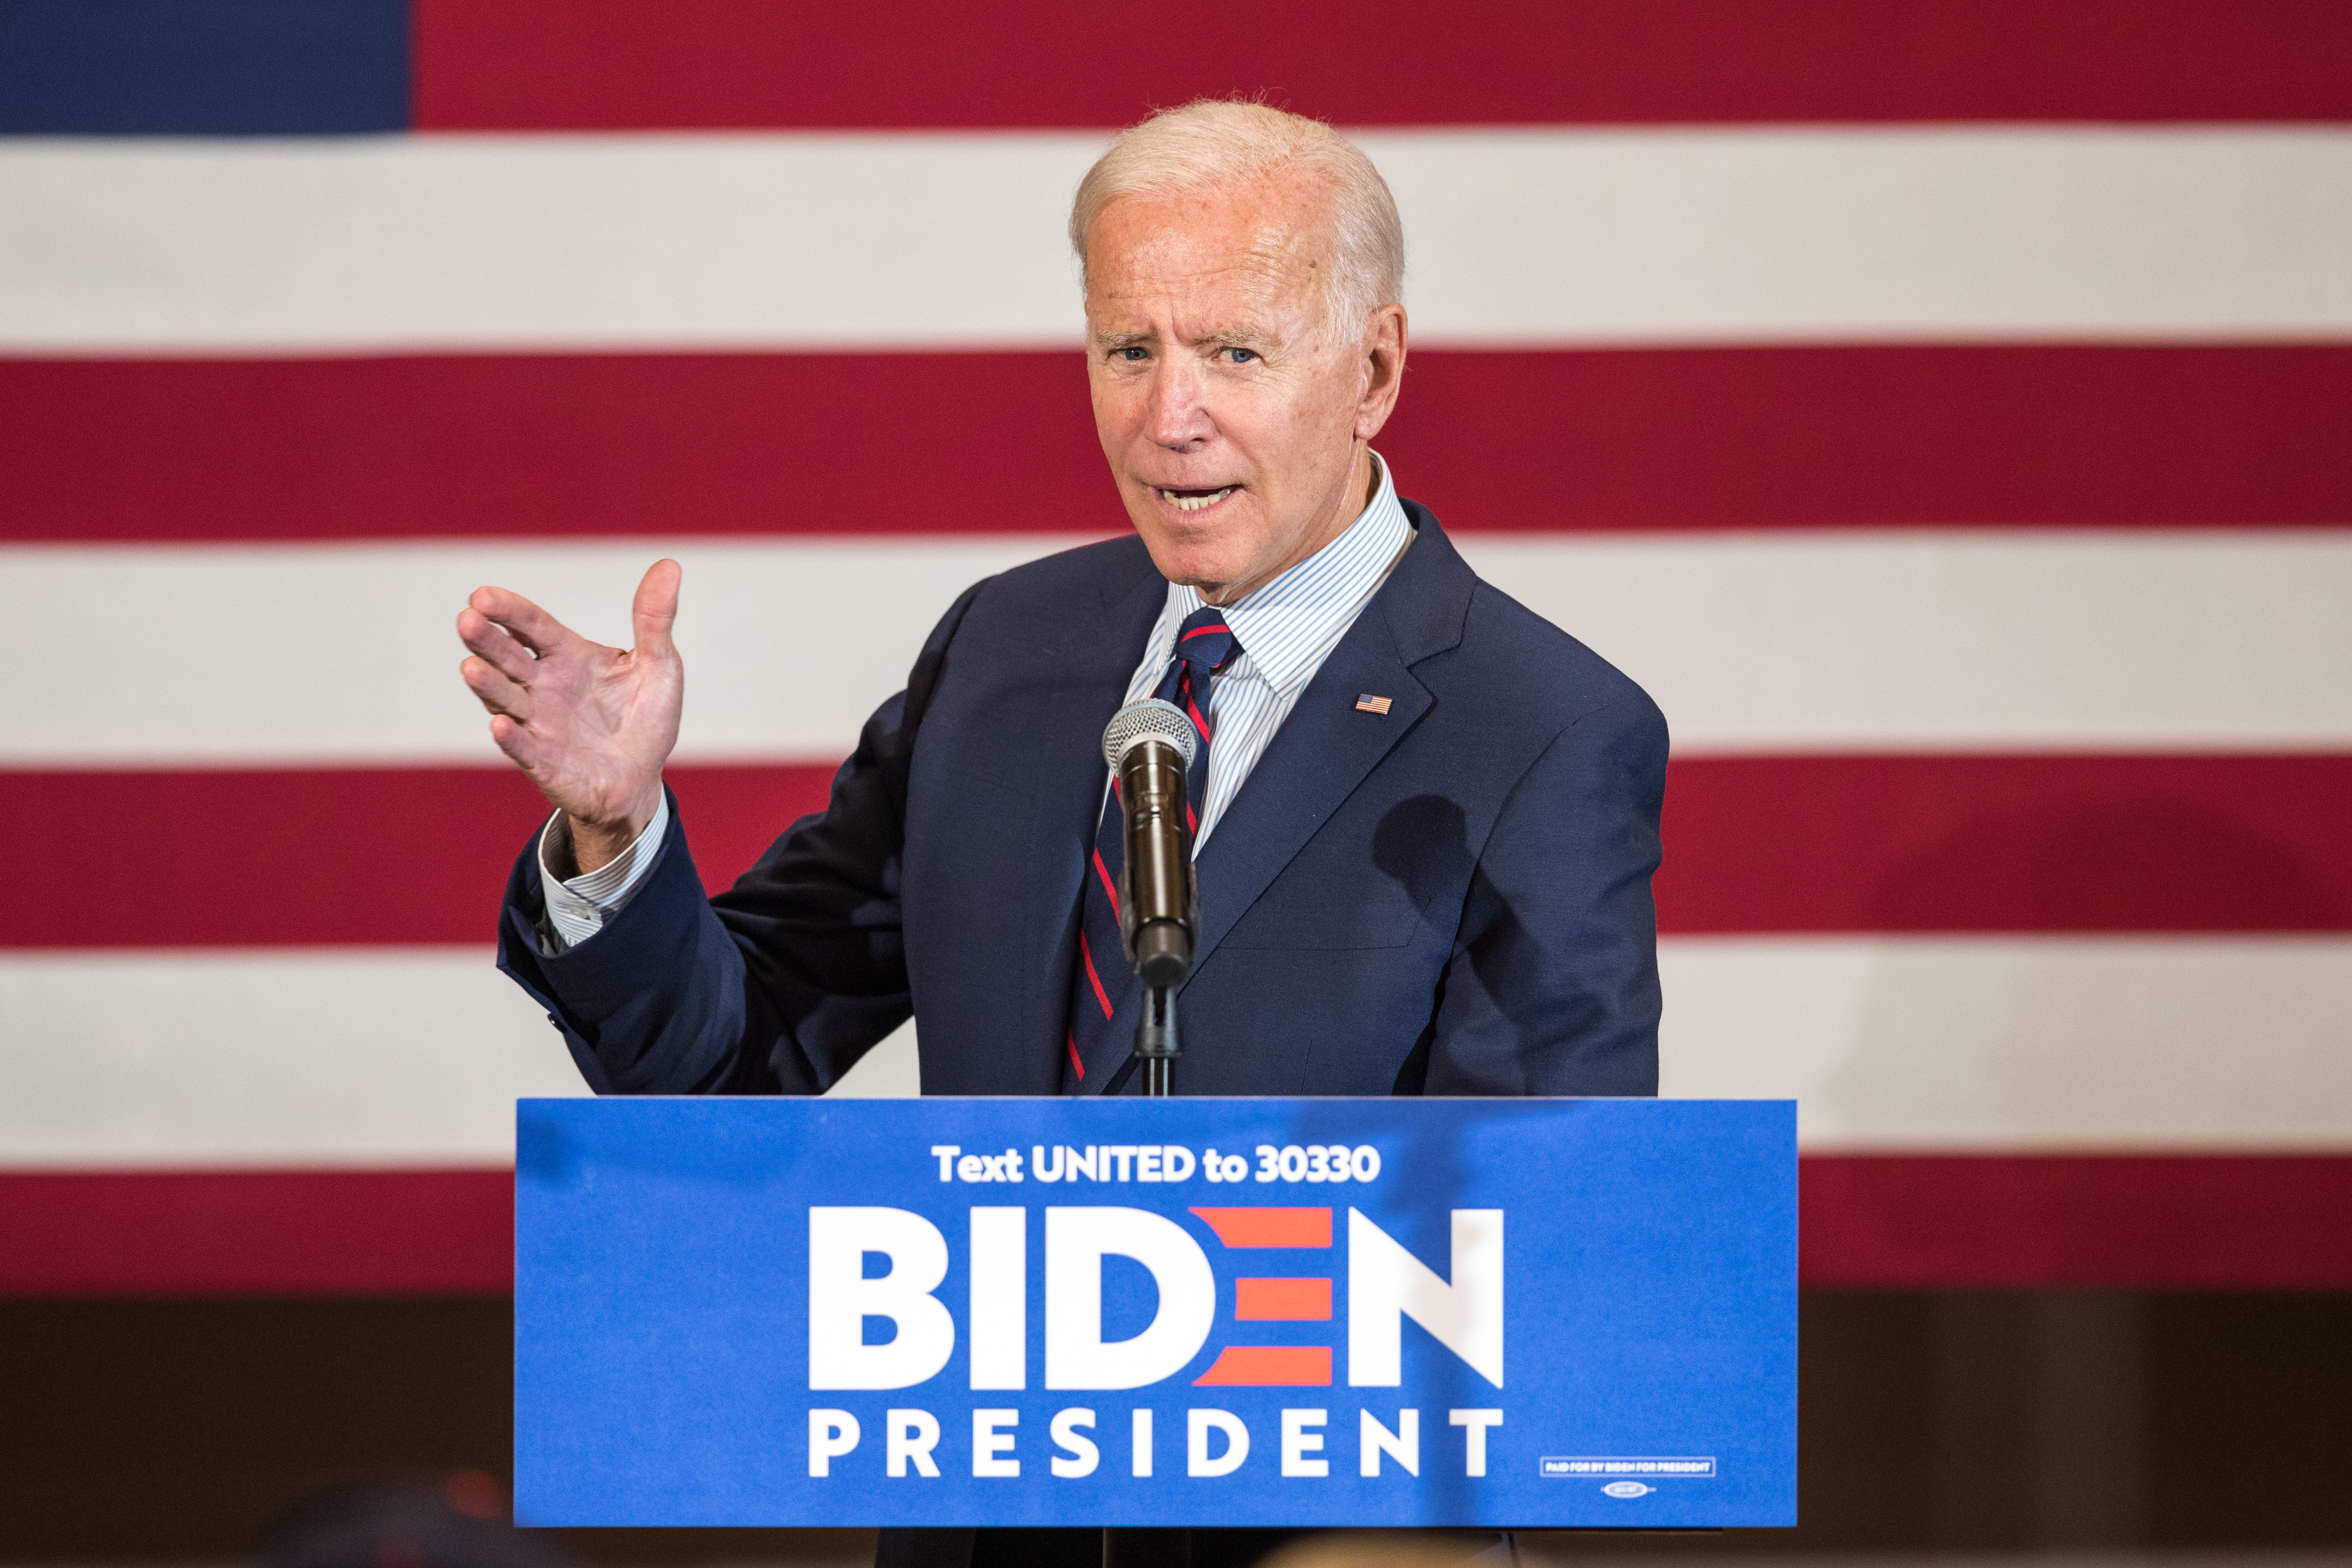 MANCHESTER, NH - OCTOBER 09: Democratic presidential candidate, former Vice President Joe Biden speaks during a campaign event on October 9, 2019 in Manchester, New Hampshire. For the first time, Biden has publicly called for President Trump to be impeached. (Photo by Scott Eisen/Getty Images)